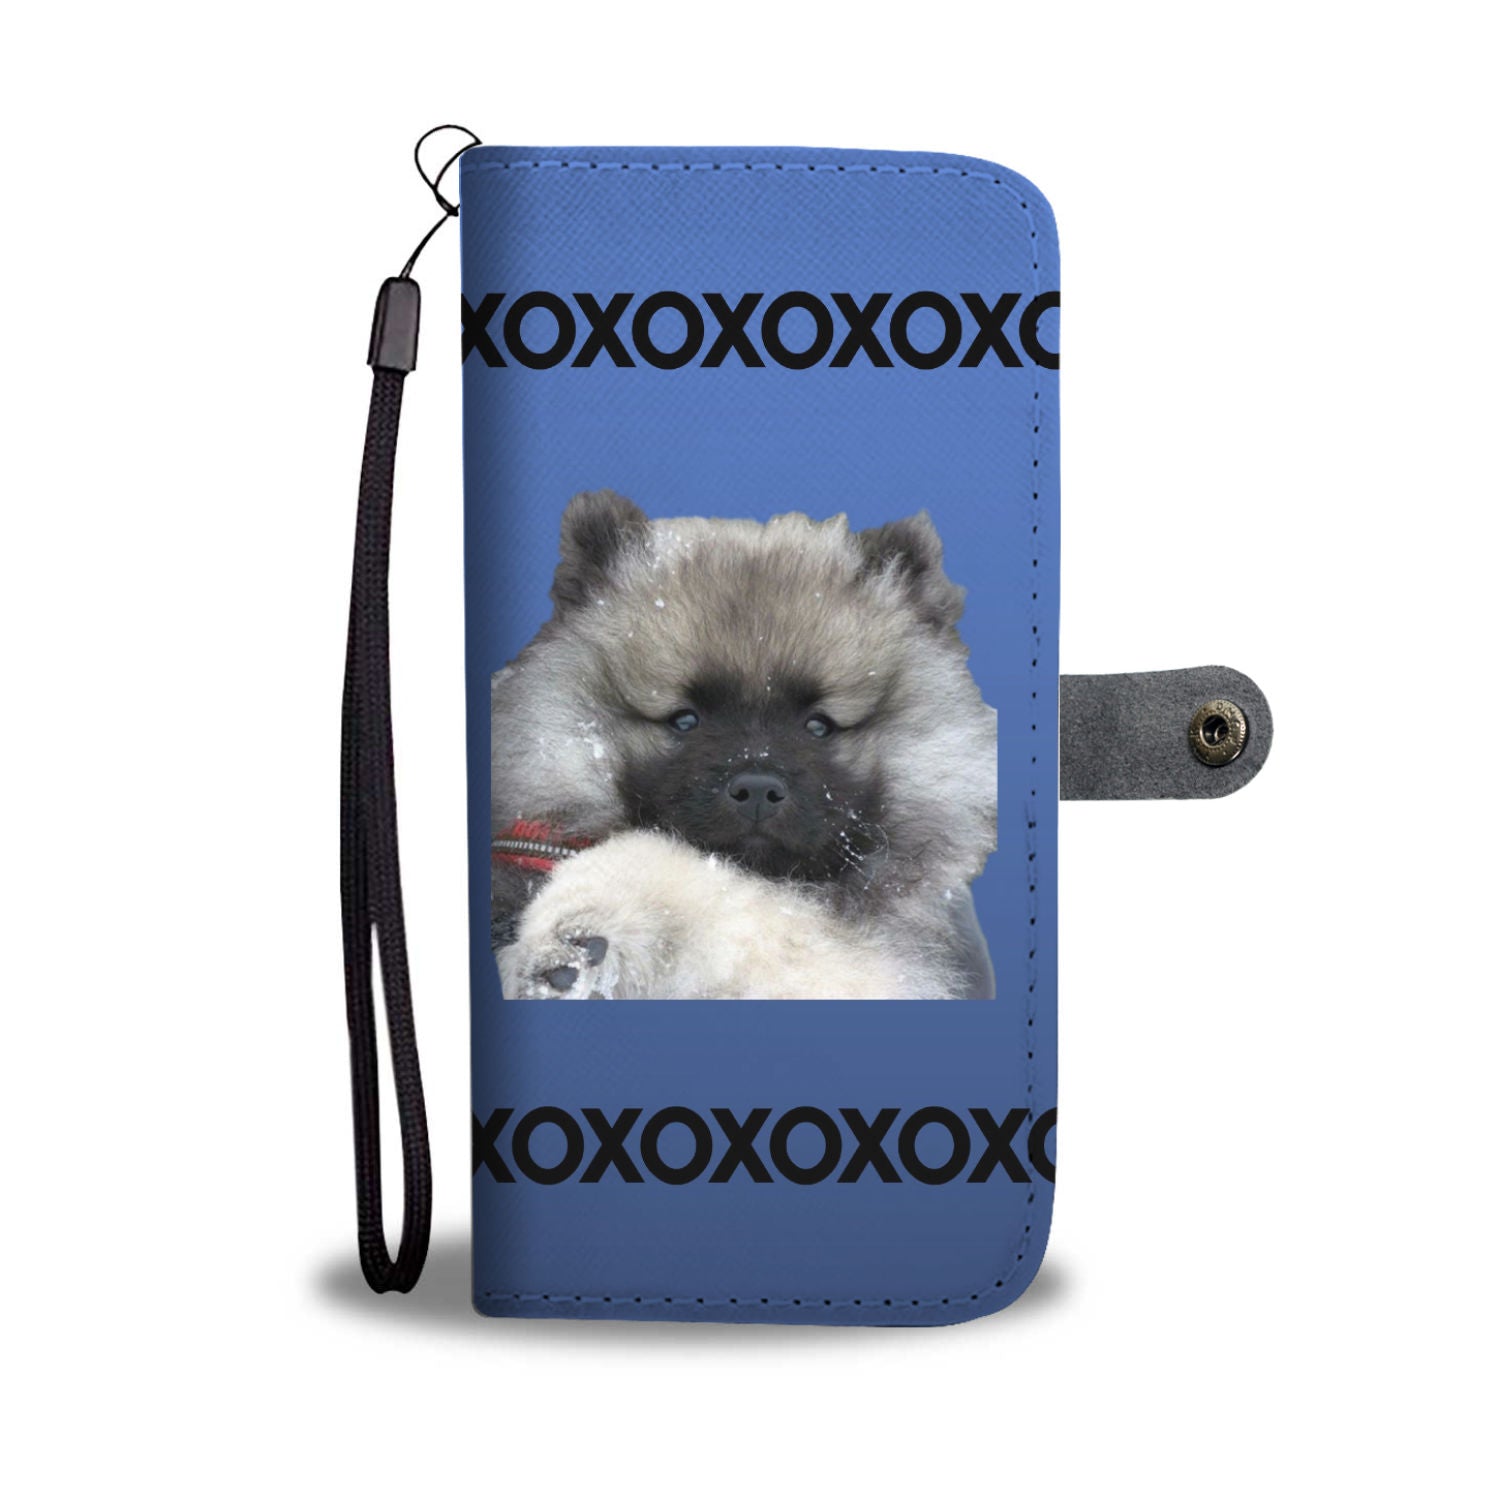 Keeshond Puppy Phone Case Wallet